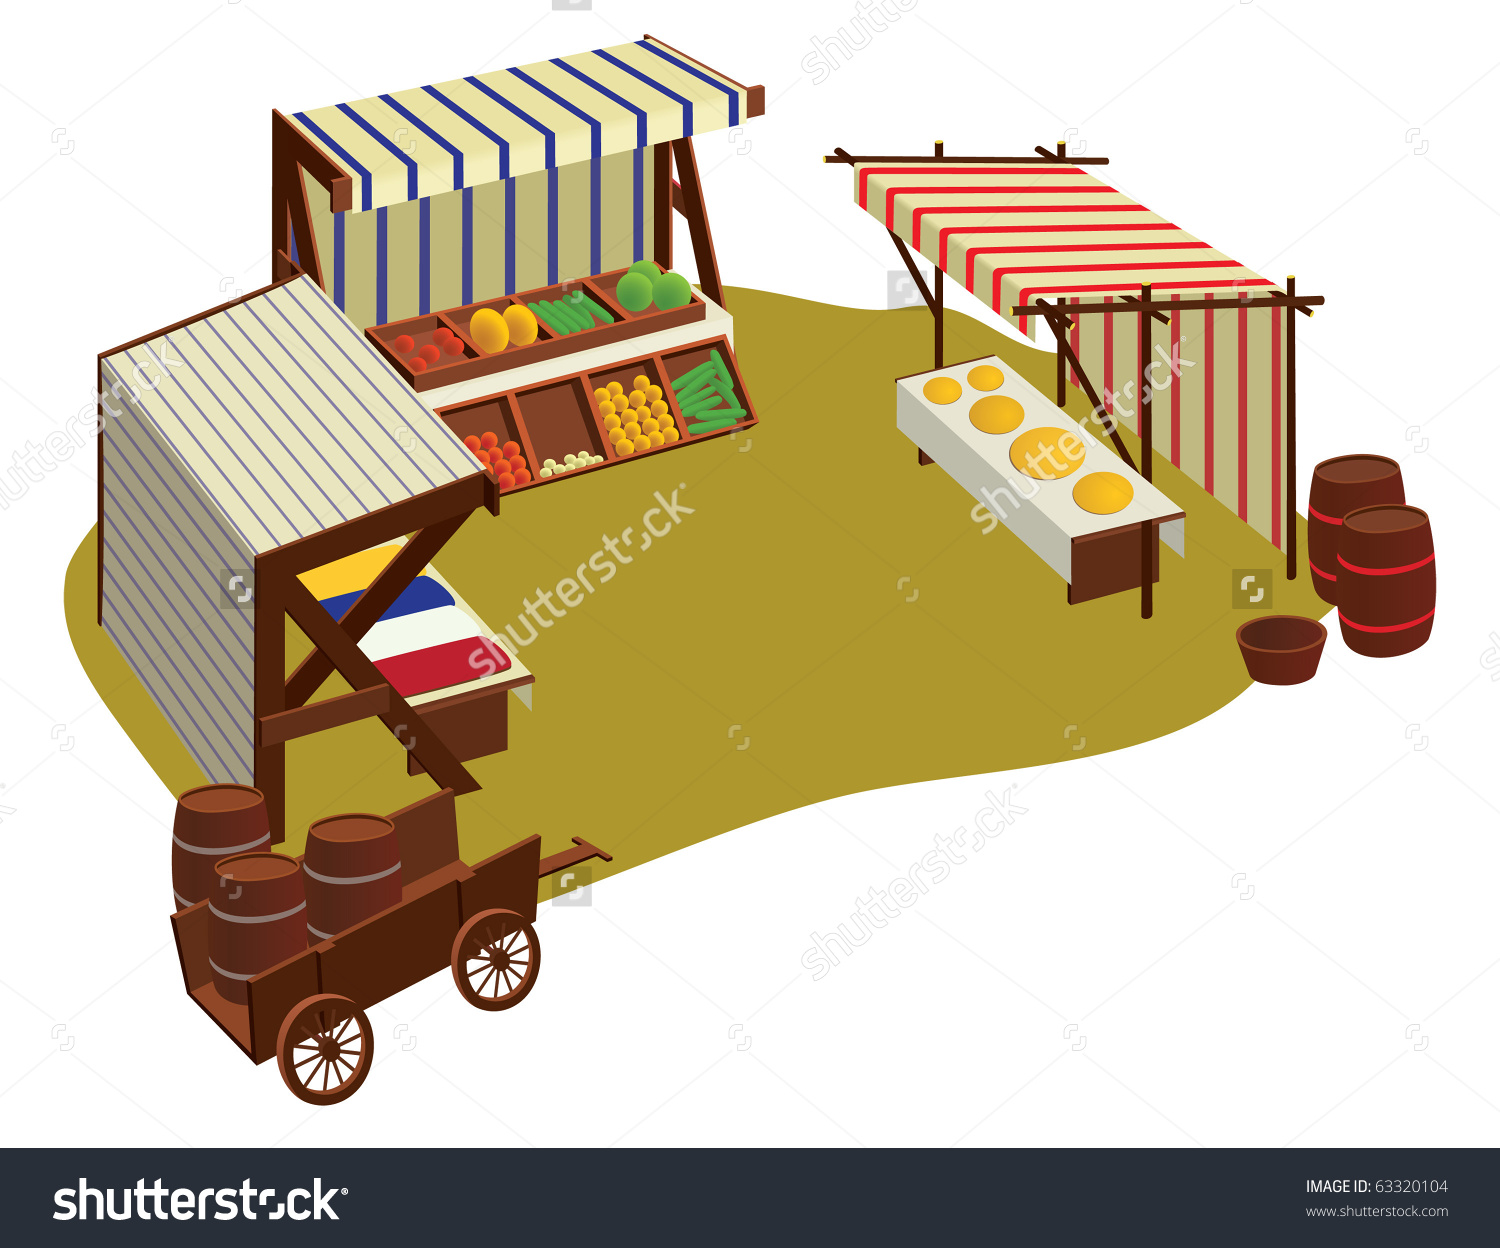 Isolated Medieval Marketplace Stock Vector 63320104.